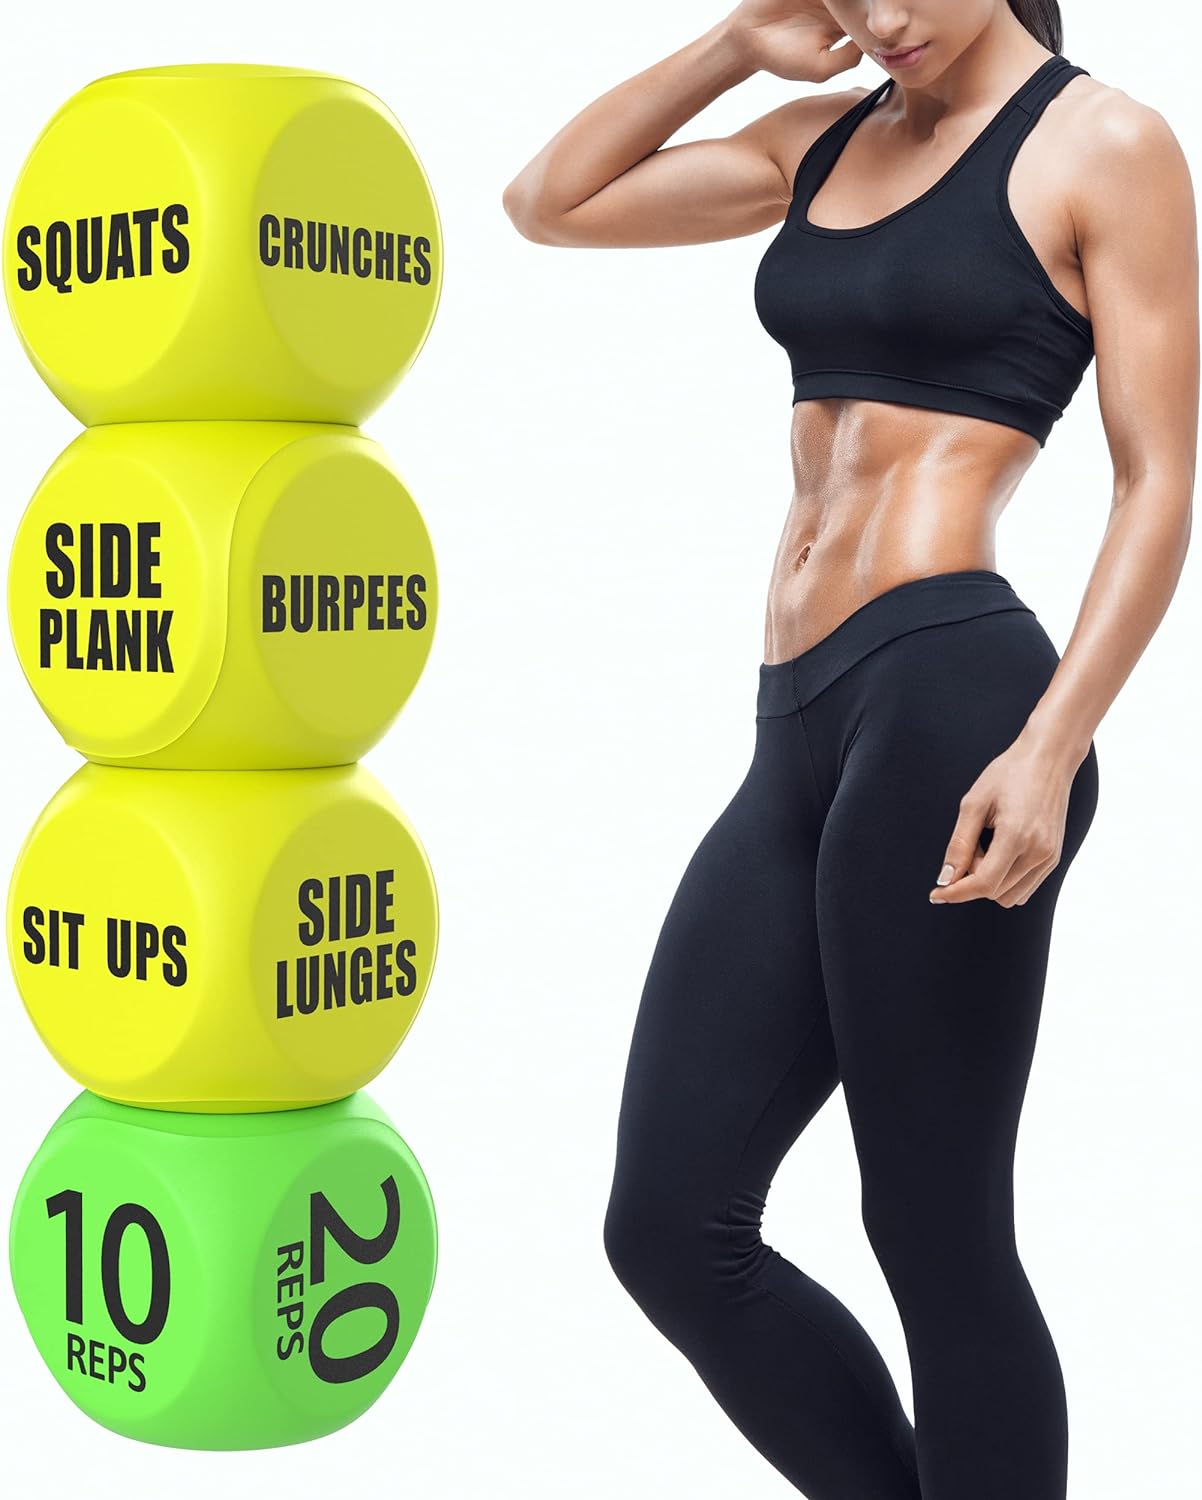 Skywin Workout Dice - 1 Pack, Yellow, Fun Exercise Dice for Solo or Group Classes, 6-Sided Foam Fitness Dice Great Dynamic Exercise Equipment